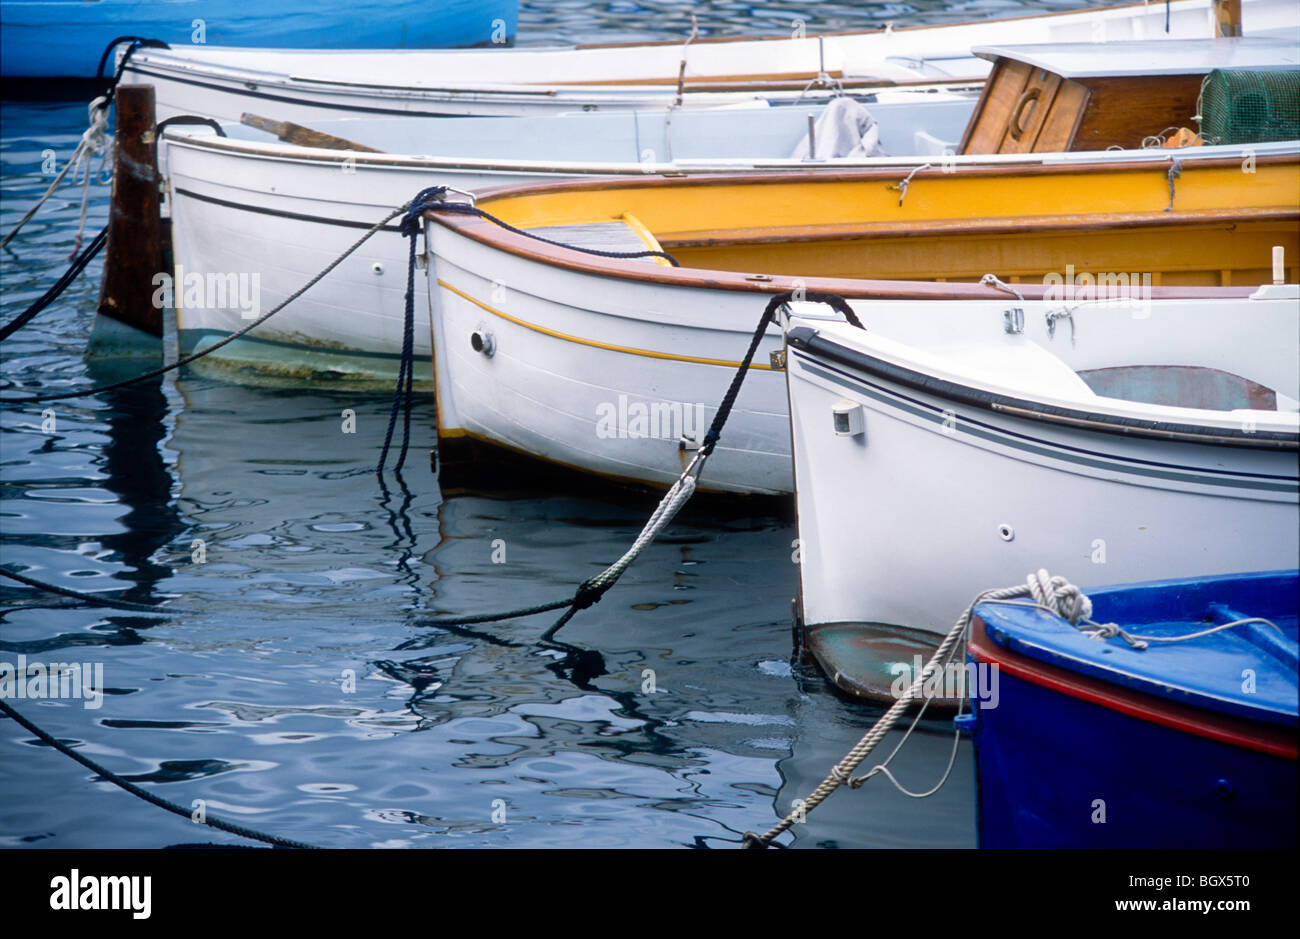 Traditional, brightly colored wooden boats in the Grand Marina, Capri, Italy, in the Mediterranean. Stock Photo